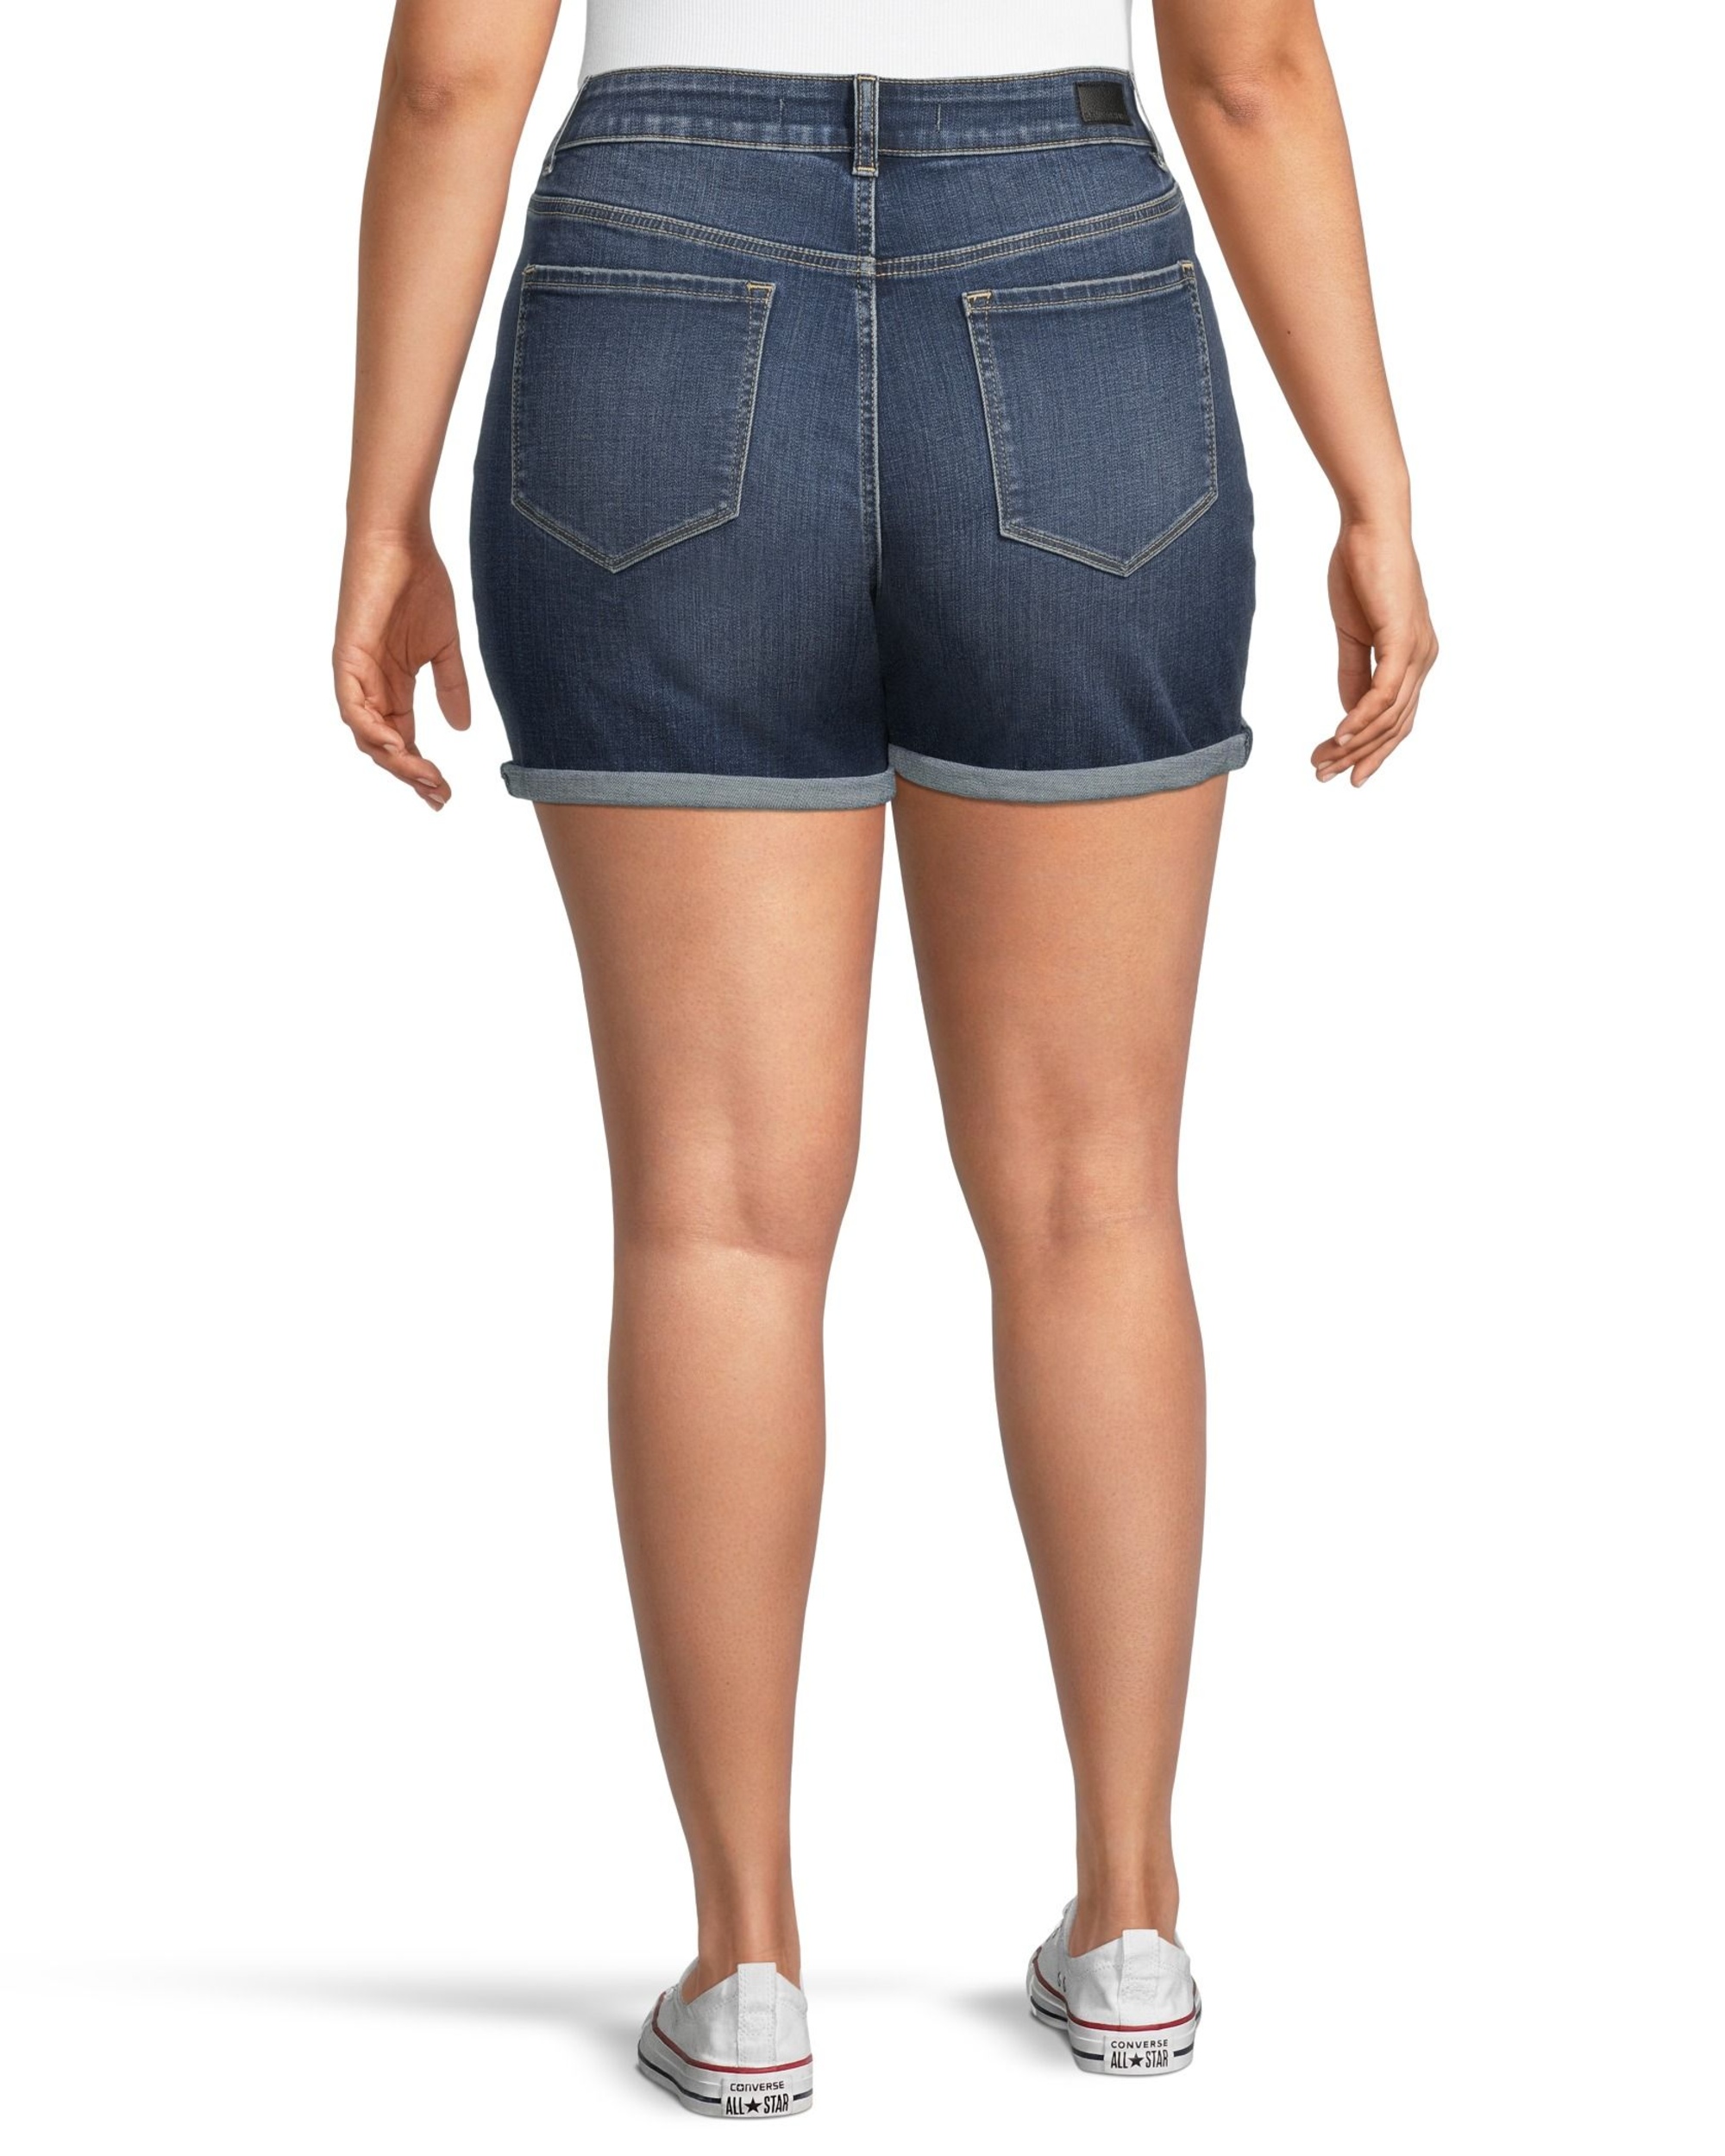 Denver Hayes Women's Curvy Fit Mid Rise Jean Shorts | Marks